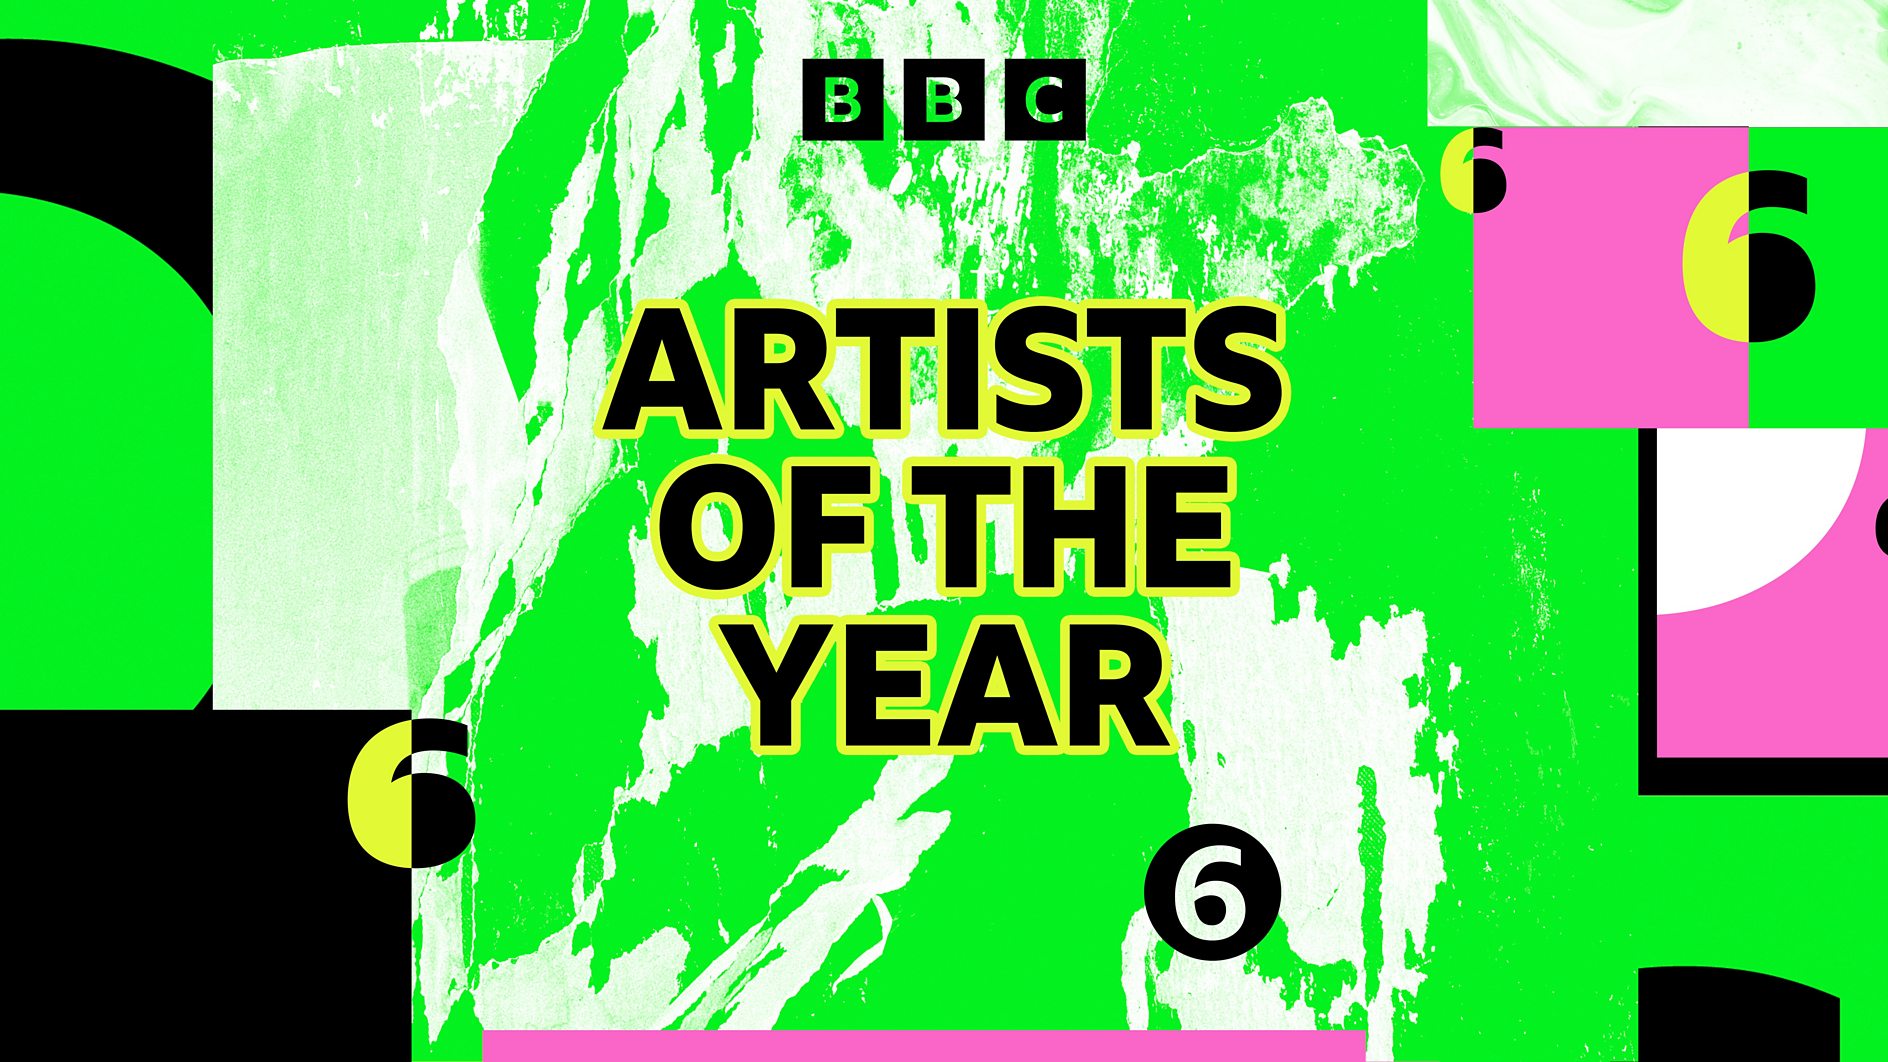 BBC Radio 6 Music launches Artists of the Year as Lauren Laverne reveals list for 2023